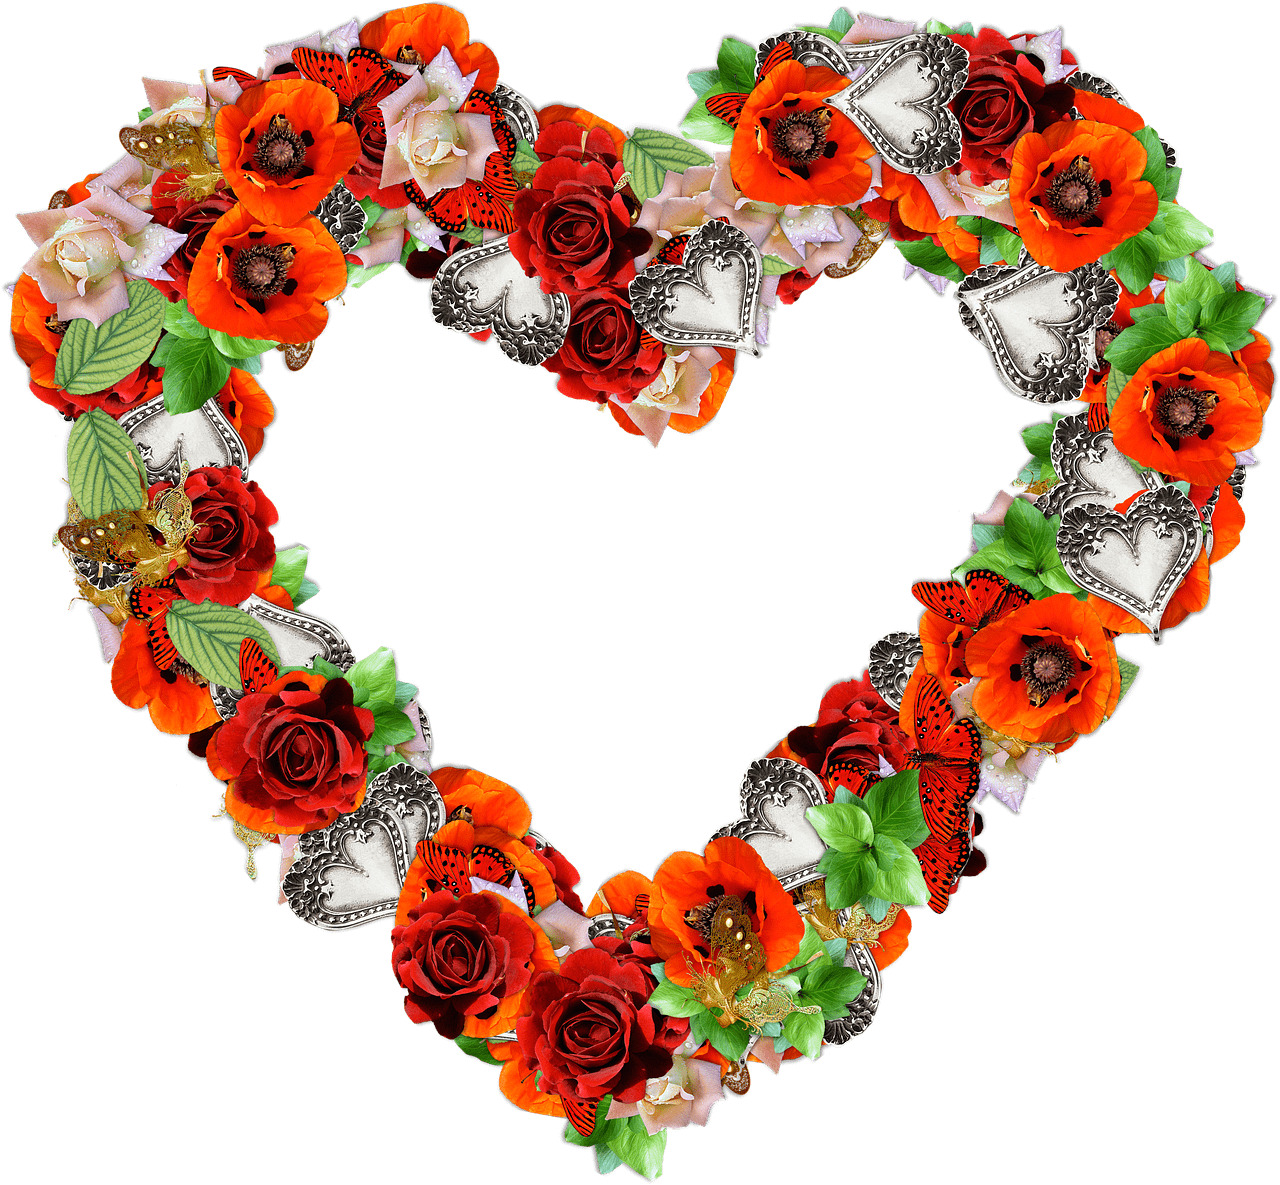 Heart Made Of Poppies and Roses icons